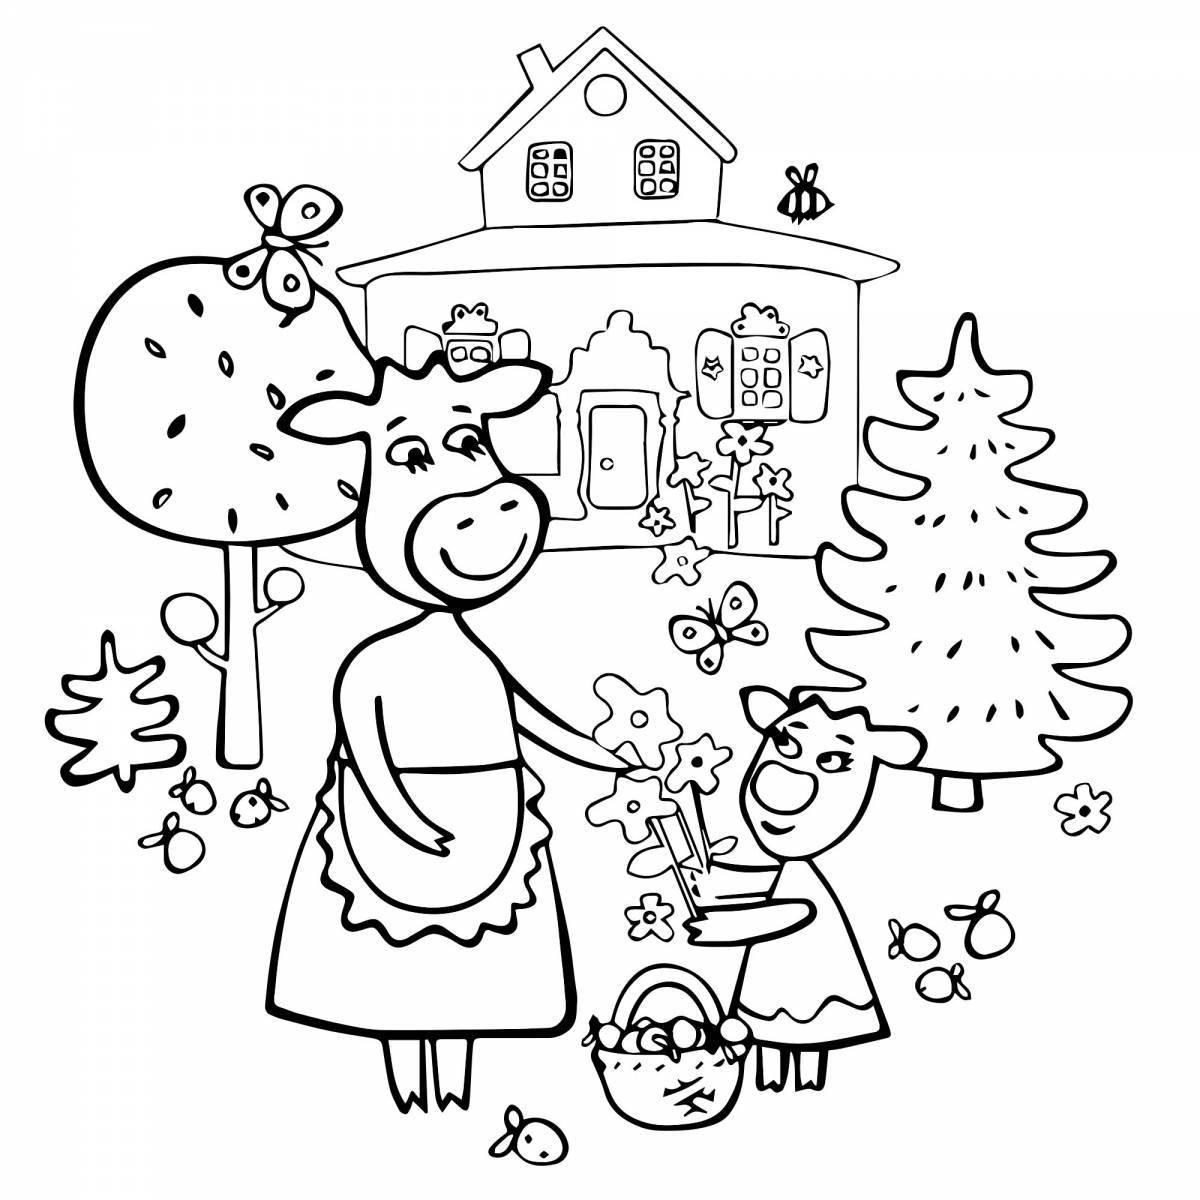 Colorful bo and zo coloring page